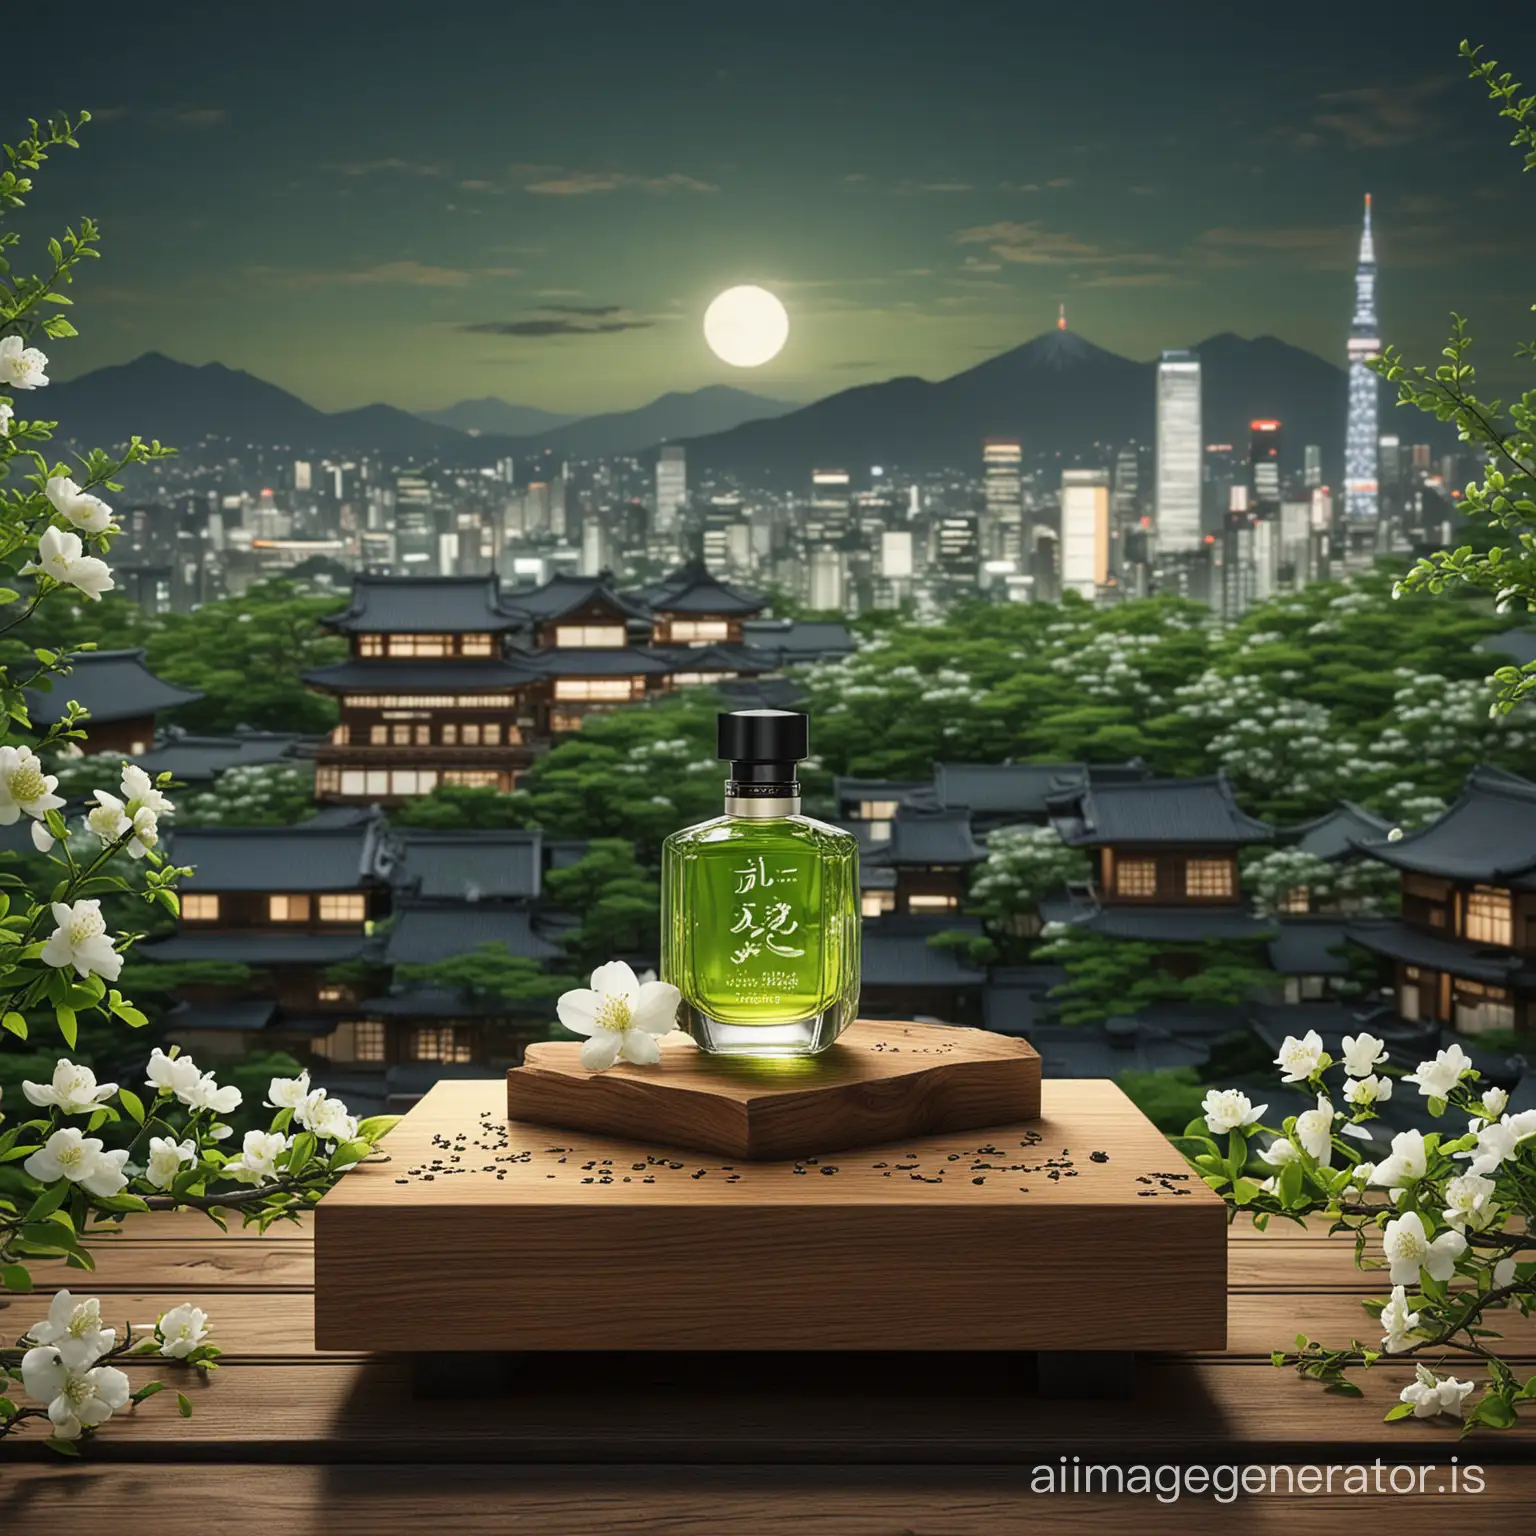 Realistic-Perfume-Product-Display-in-Urban-Japan-with-White-Flowers-and-Green-Tea-Essence